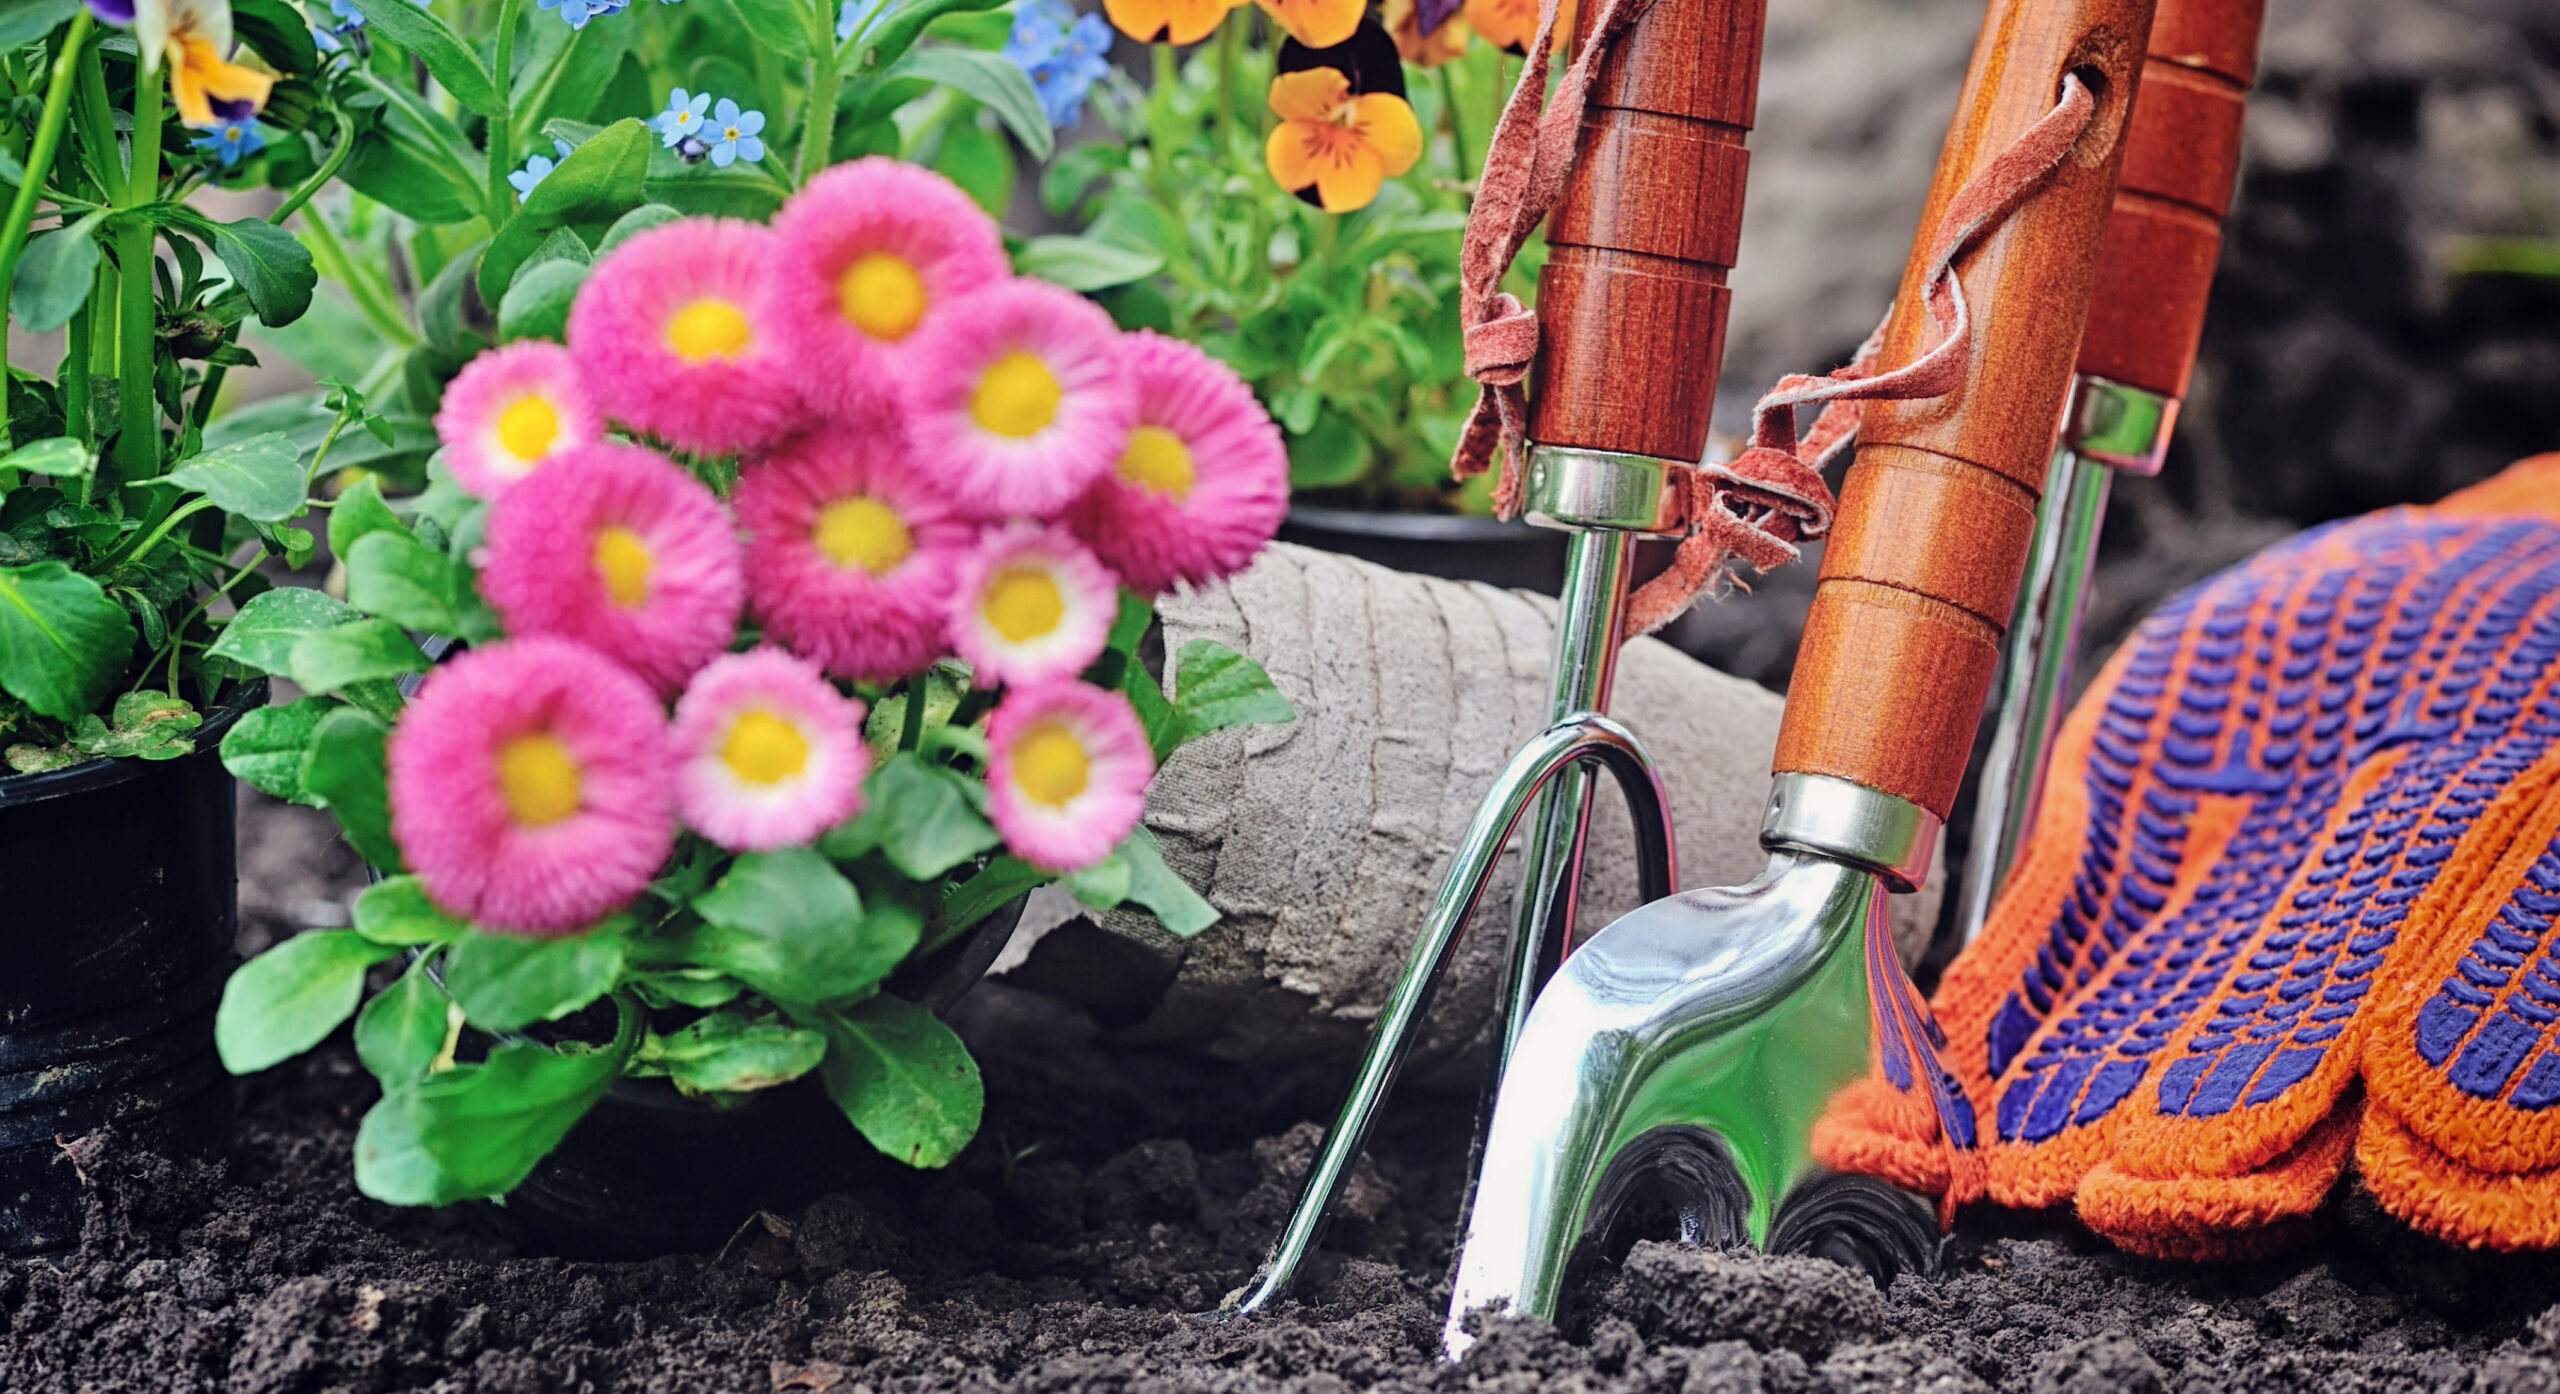 Gardening tools and spring flowers in a Franklin, Tennessee garden.